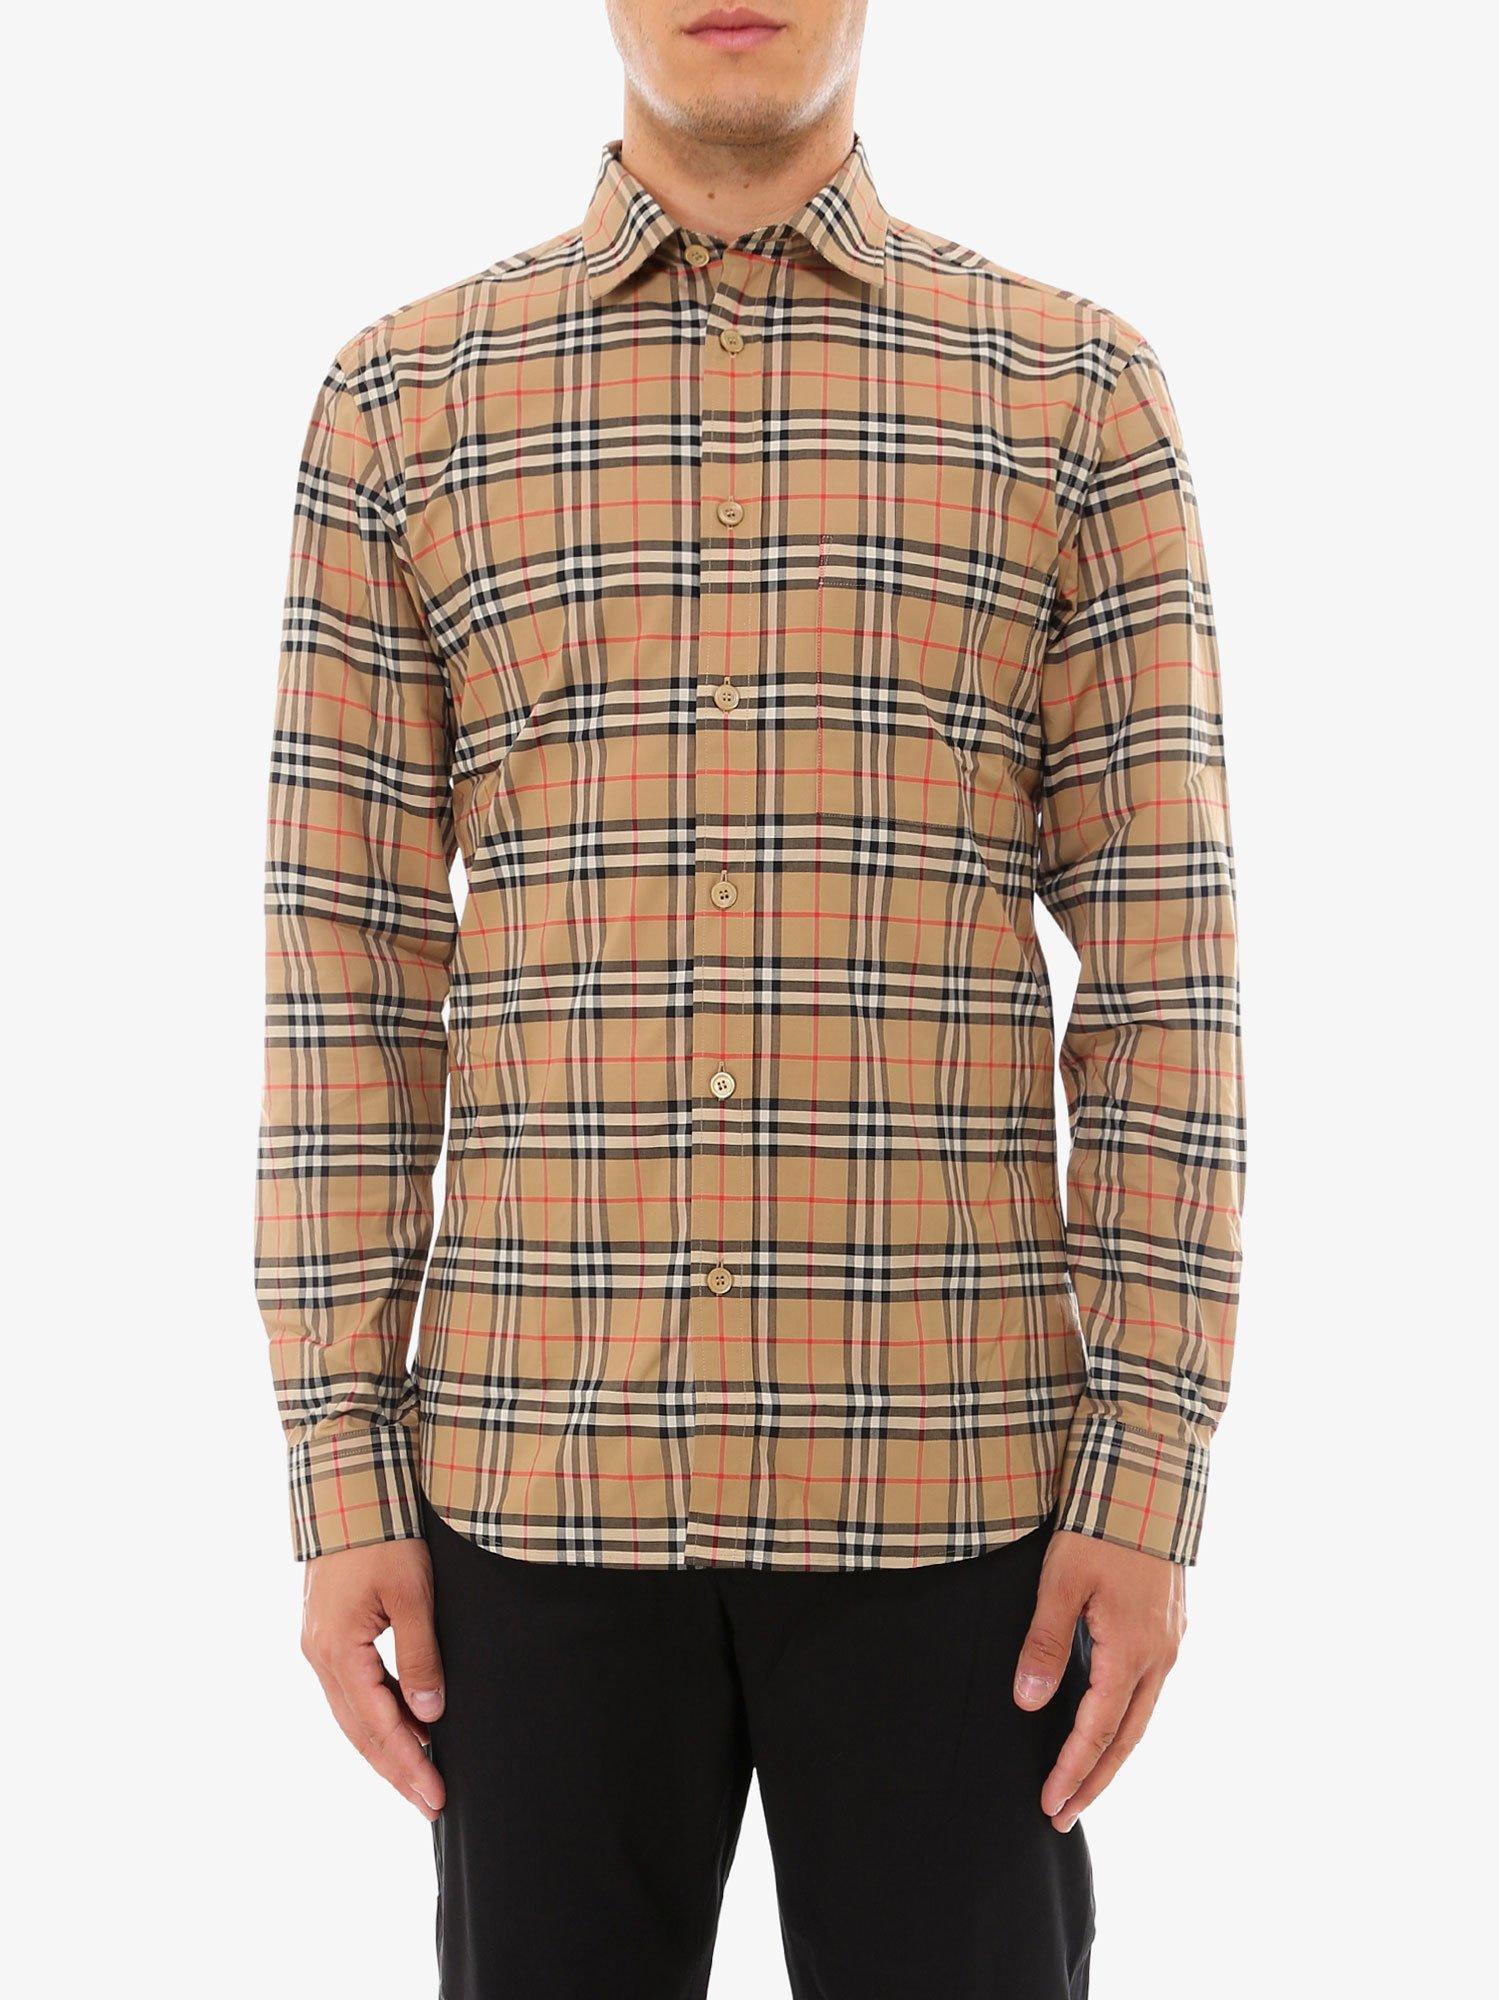 Burberry Shirt in Beige (Natural) for Men - Lyst